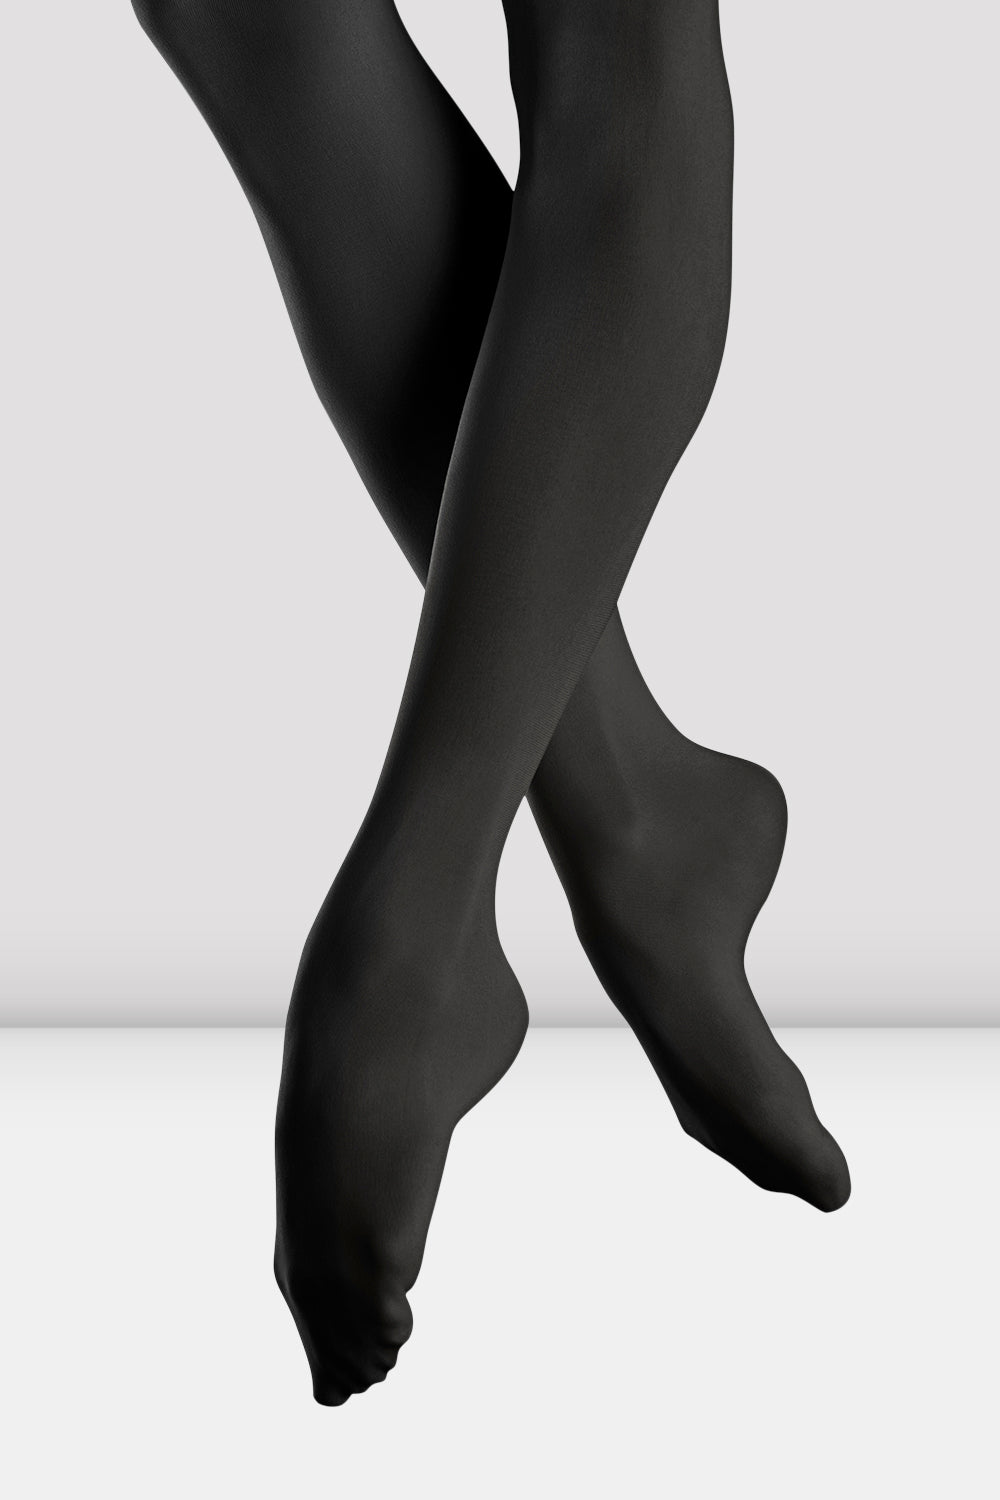 Women Footed Tights – The Dance Shoppe